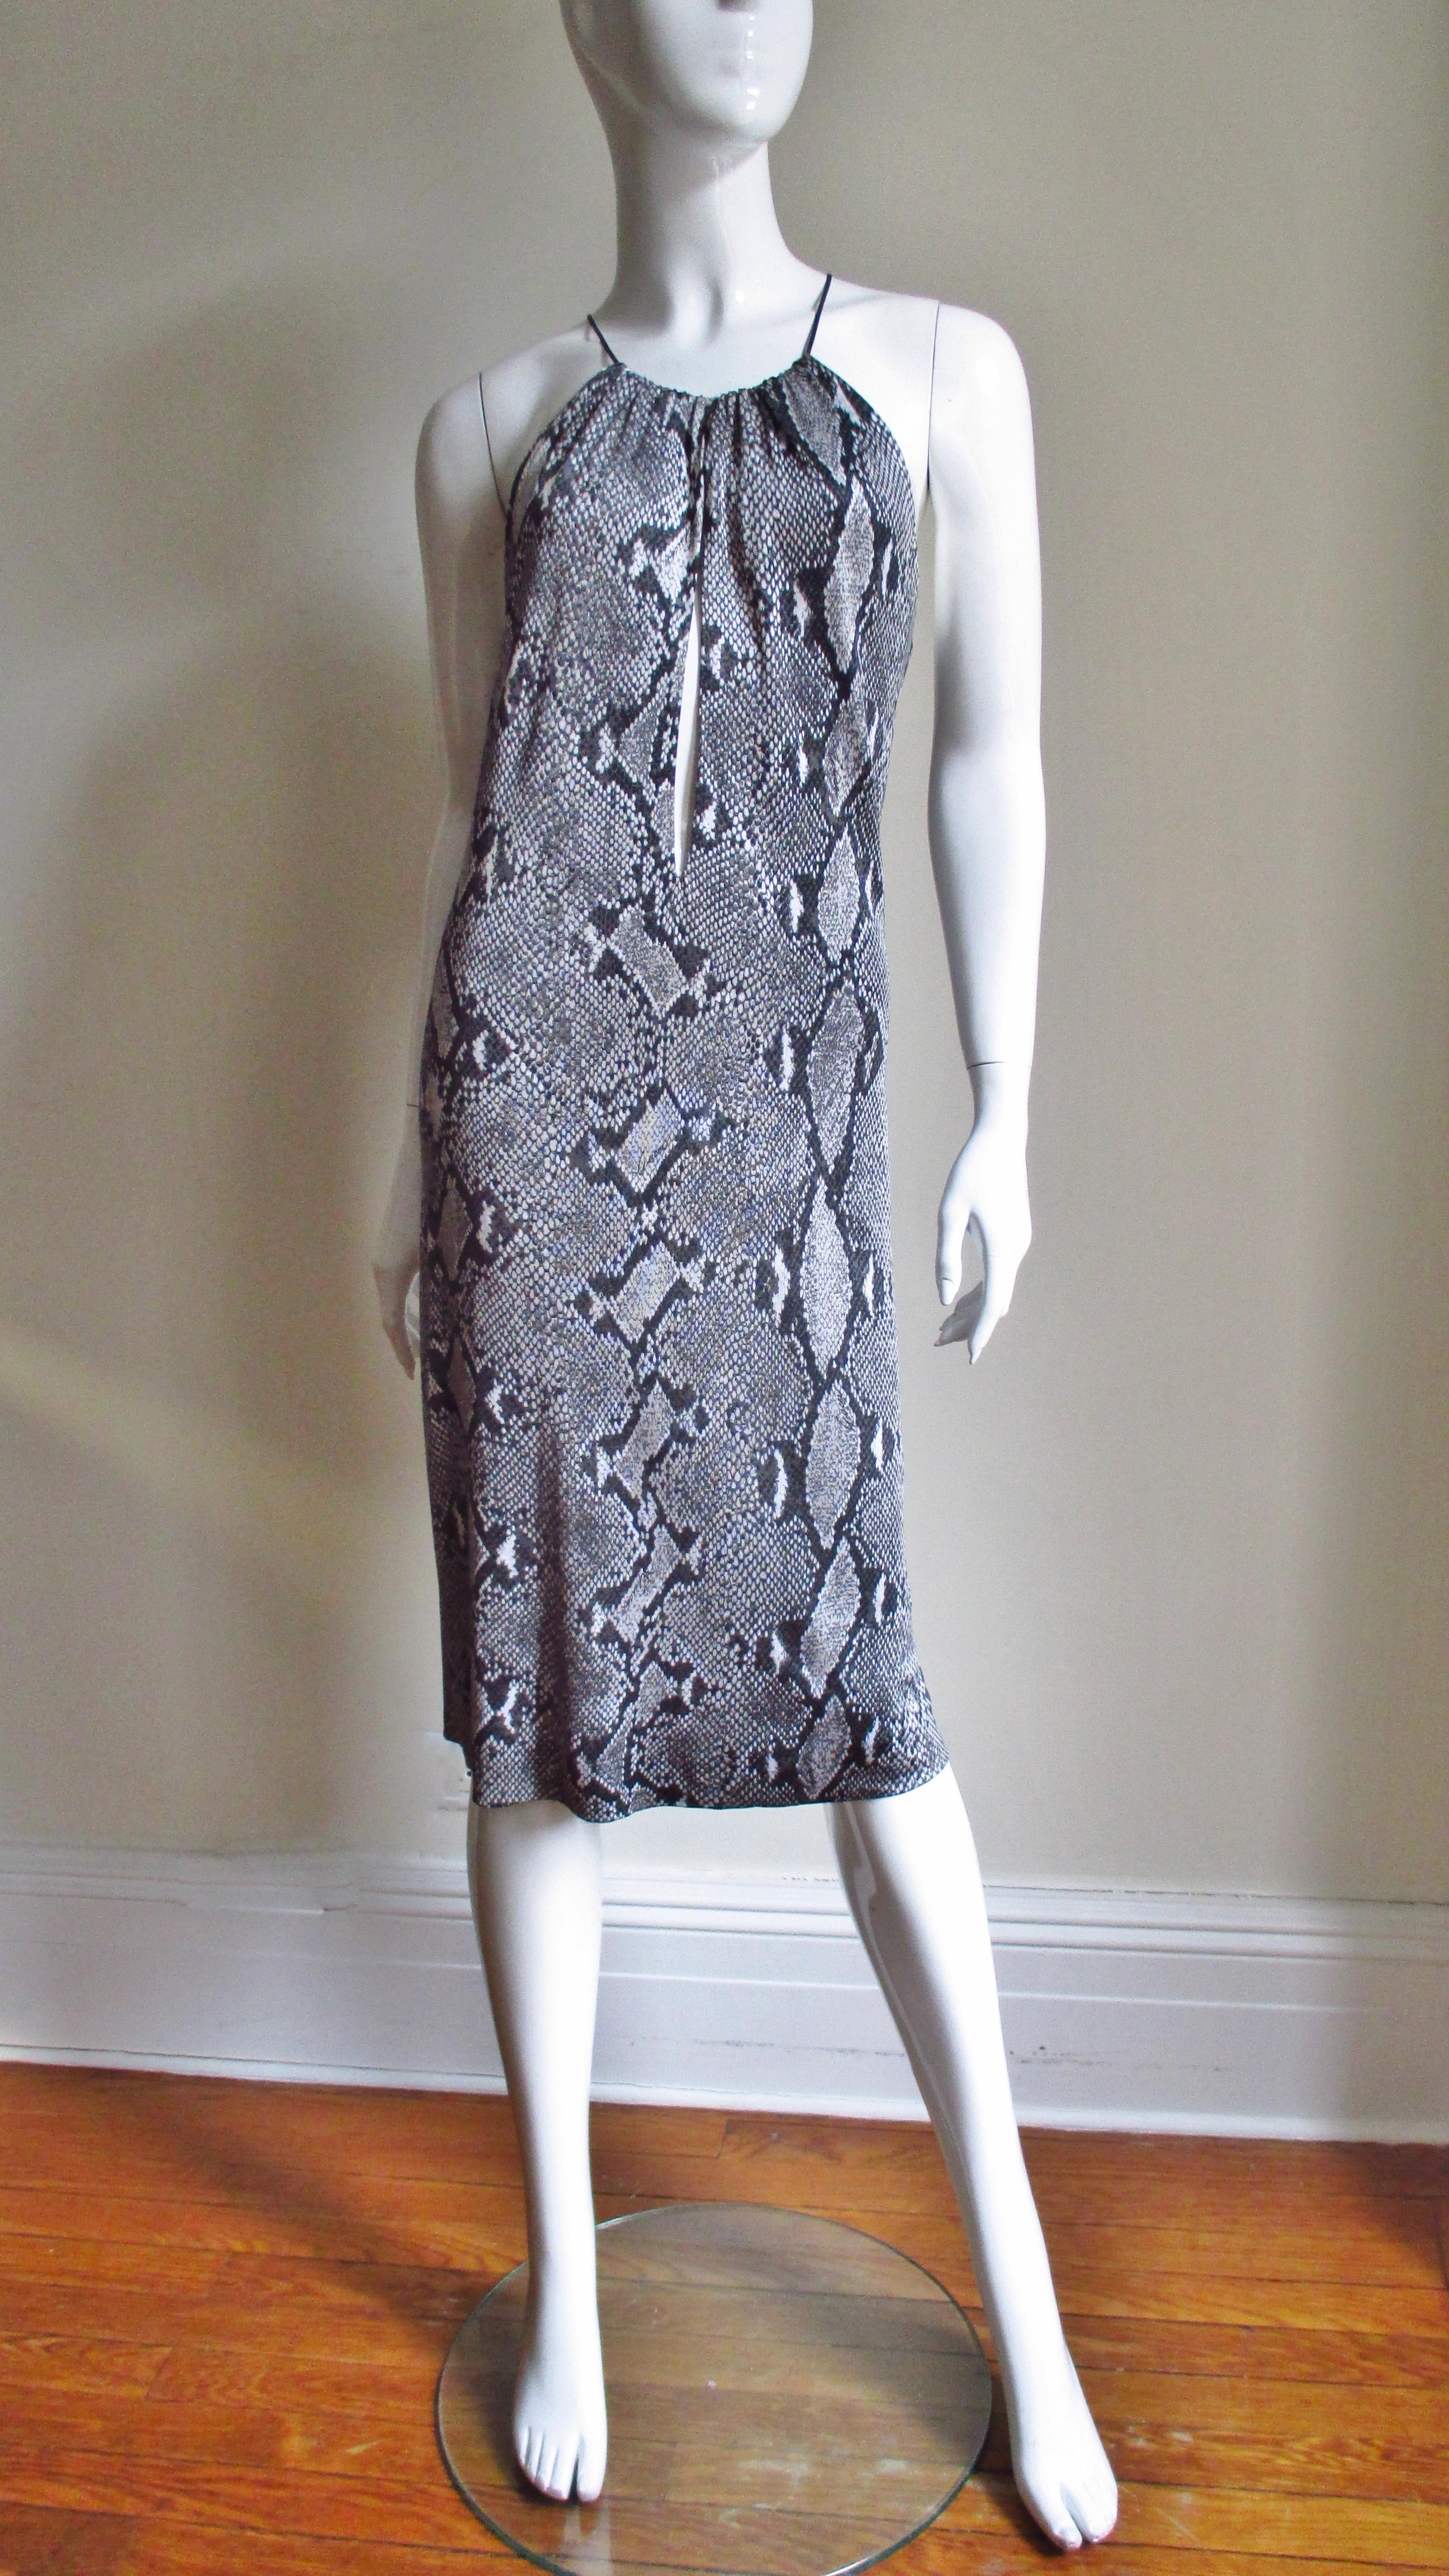 Tom Ford for Gucci Silk Python Print Dress SS 2000 In Excellent Condition For Sale In Water Mill, NY